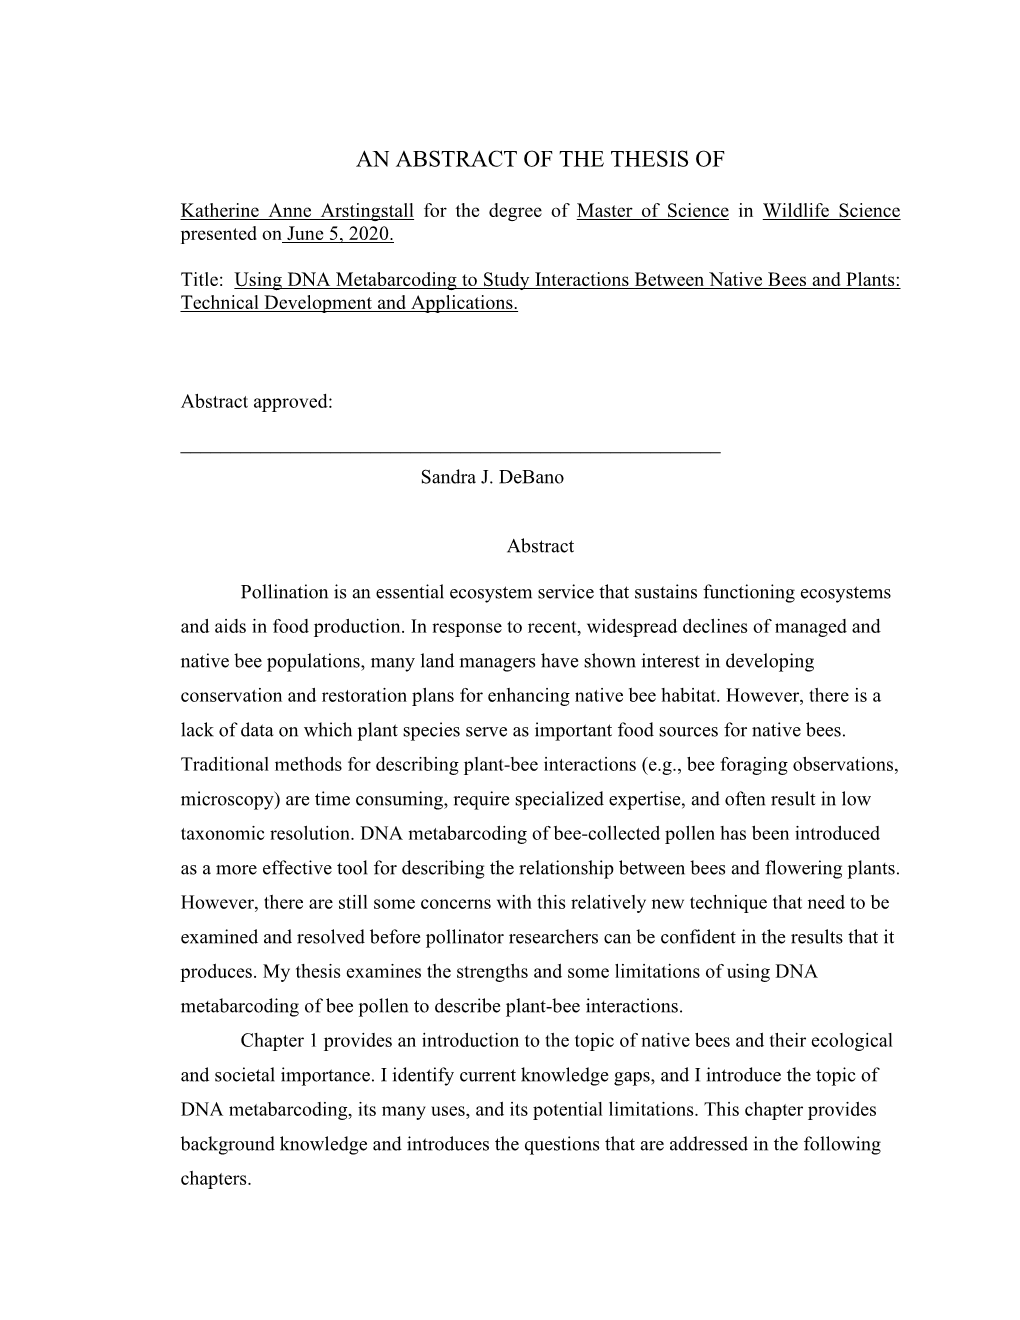 An Abstract of the Thesis Of